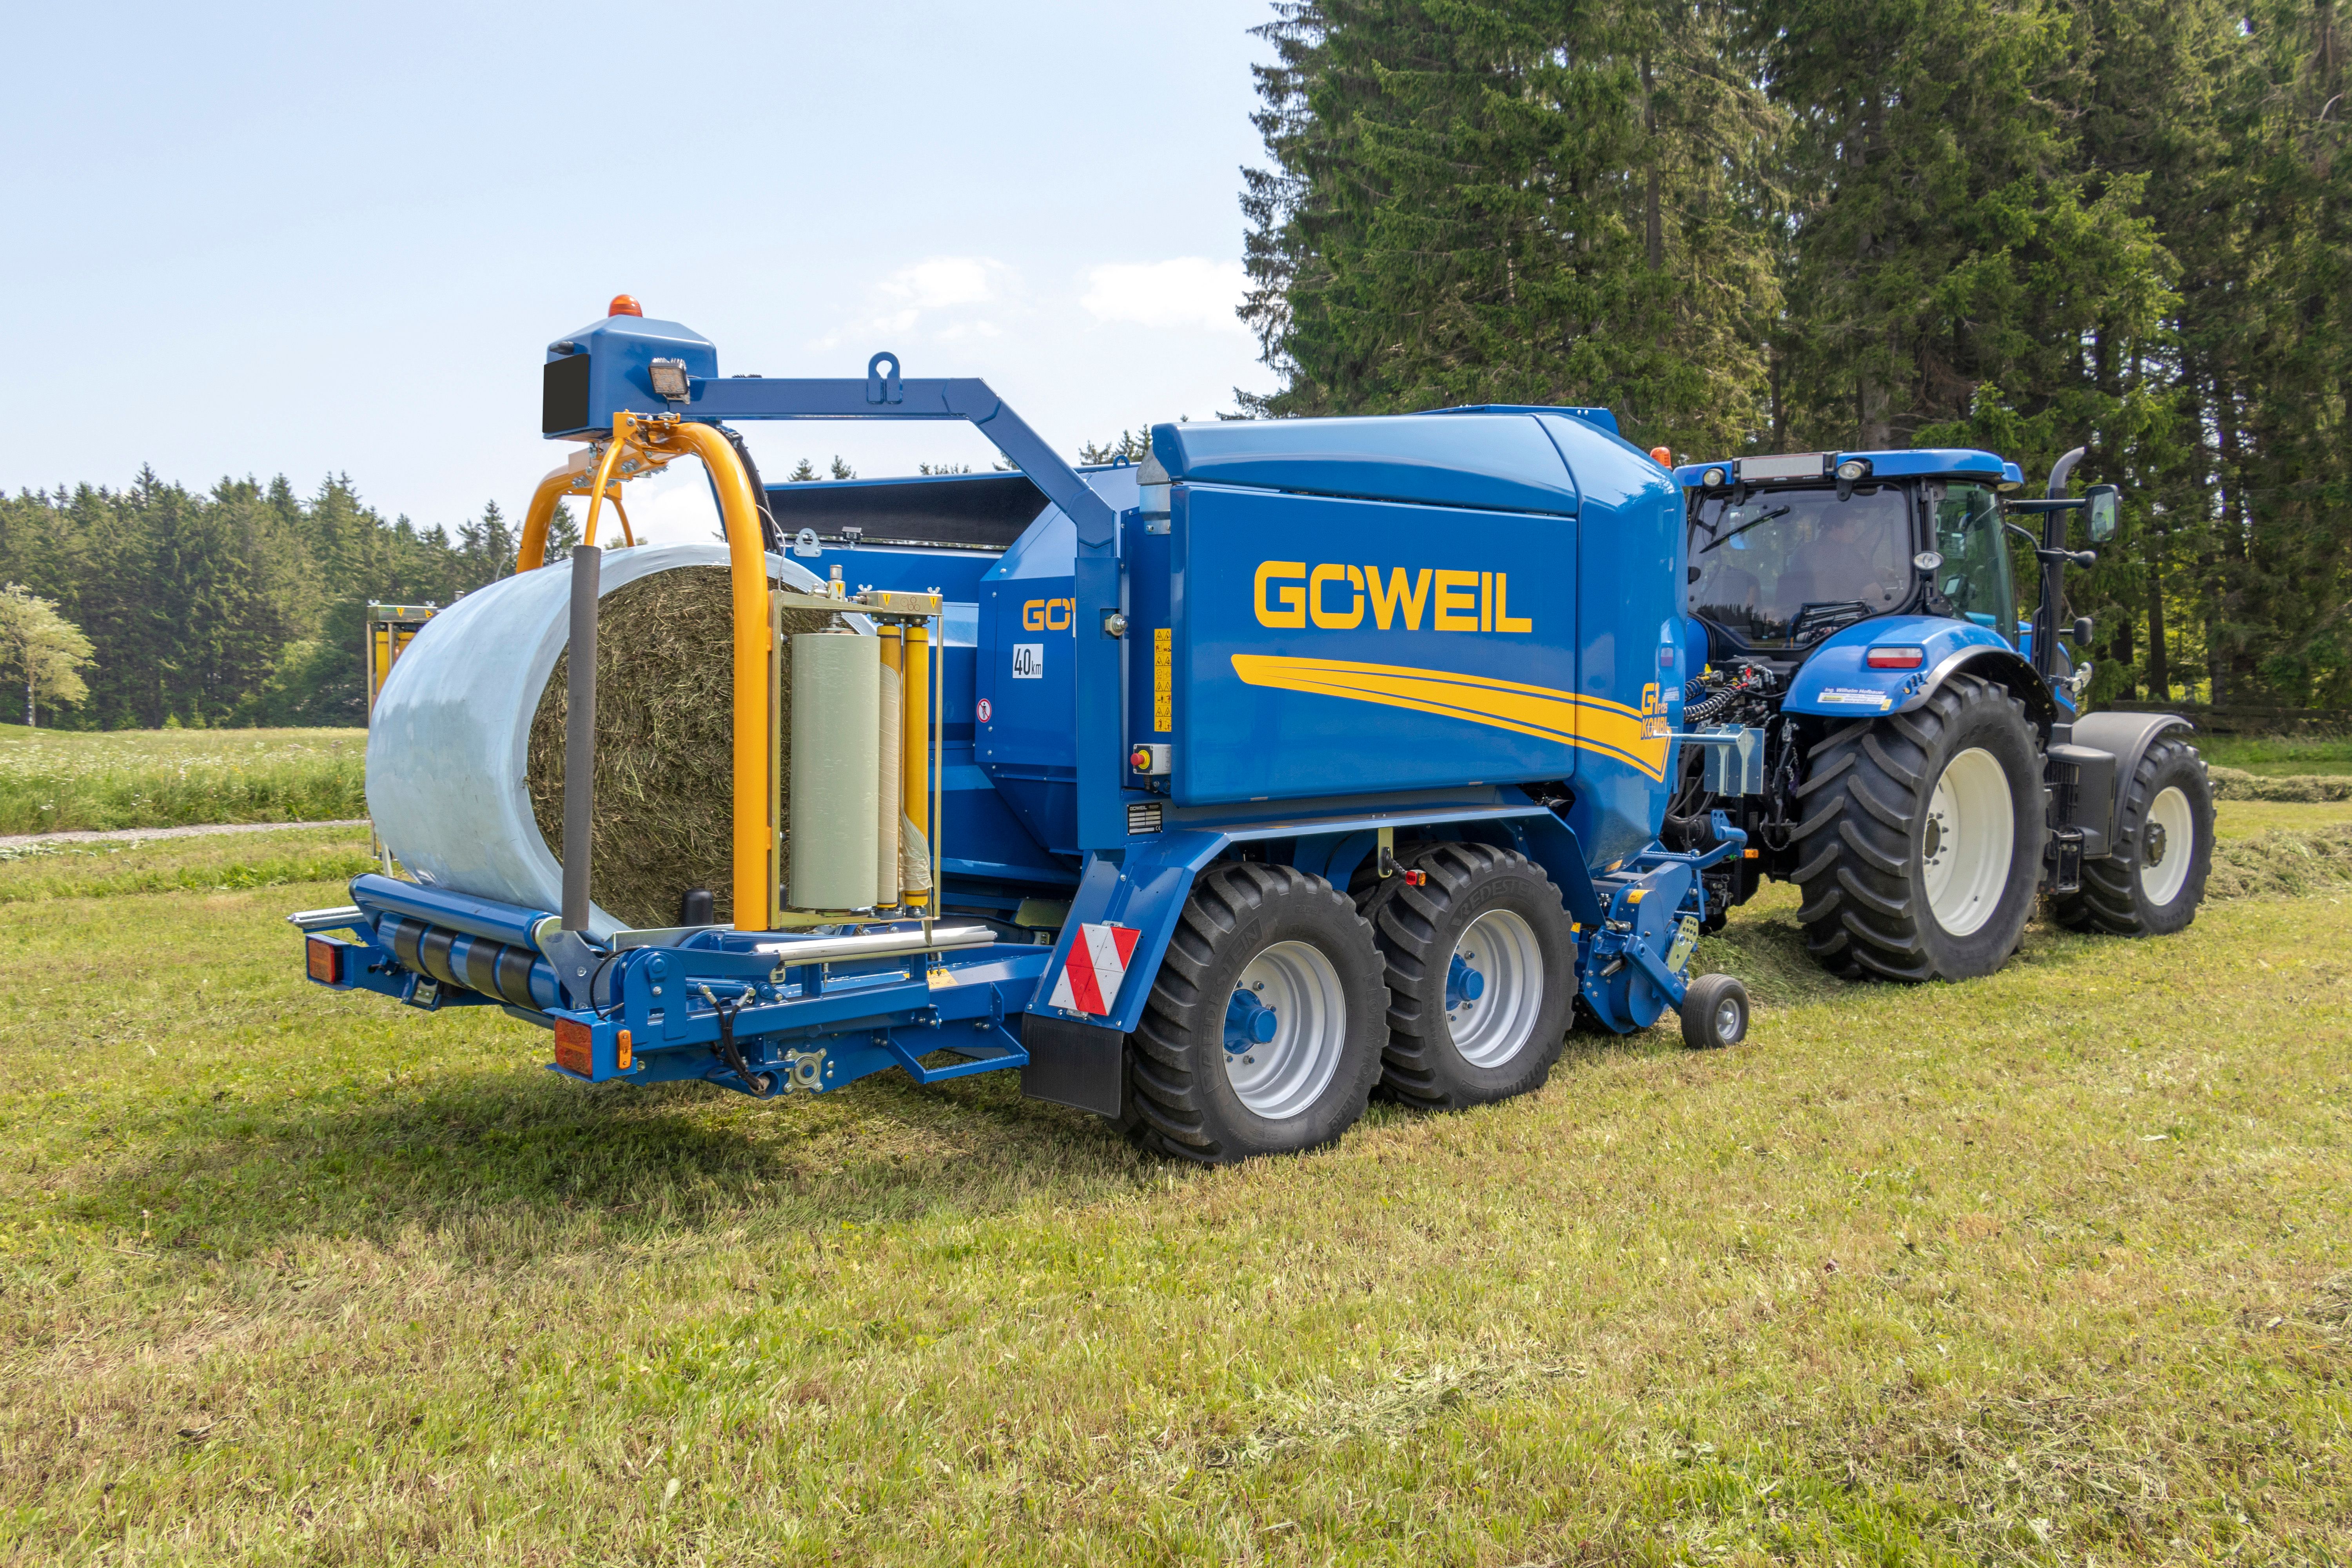 Perfect Bales with the GÖWEIL Wrapper Baler